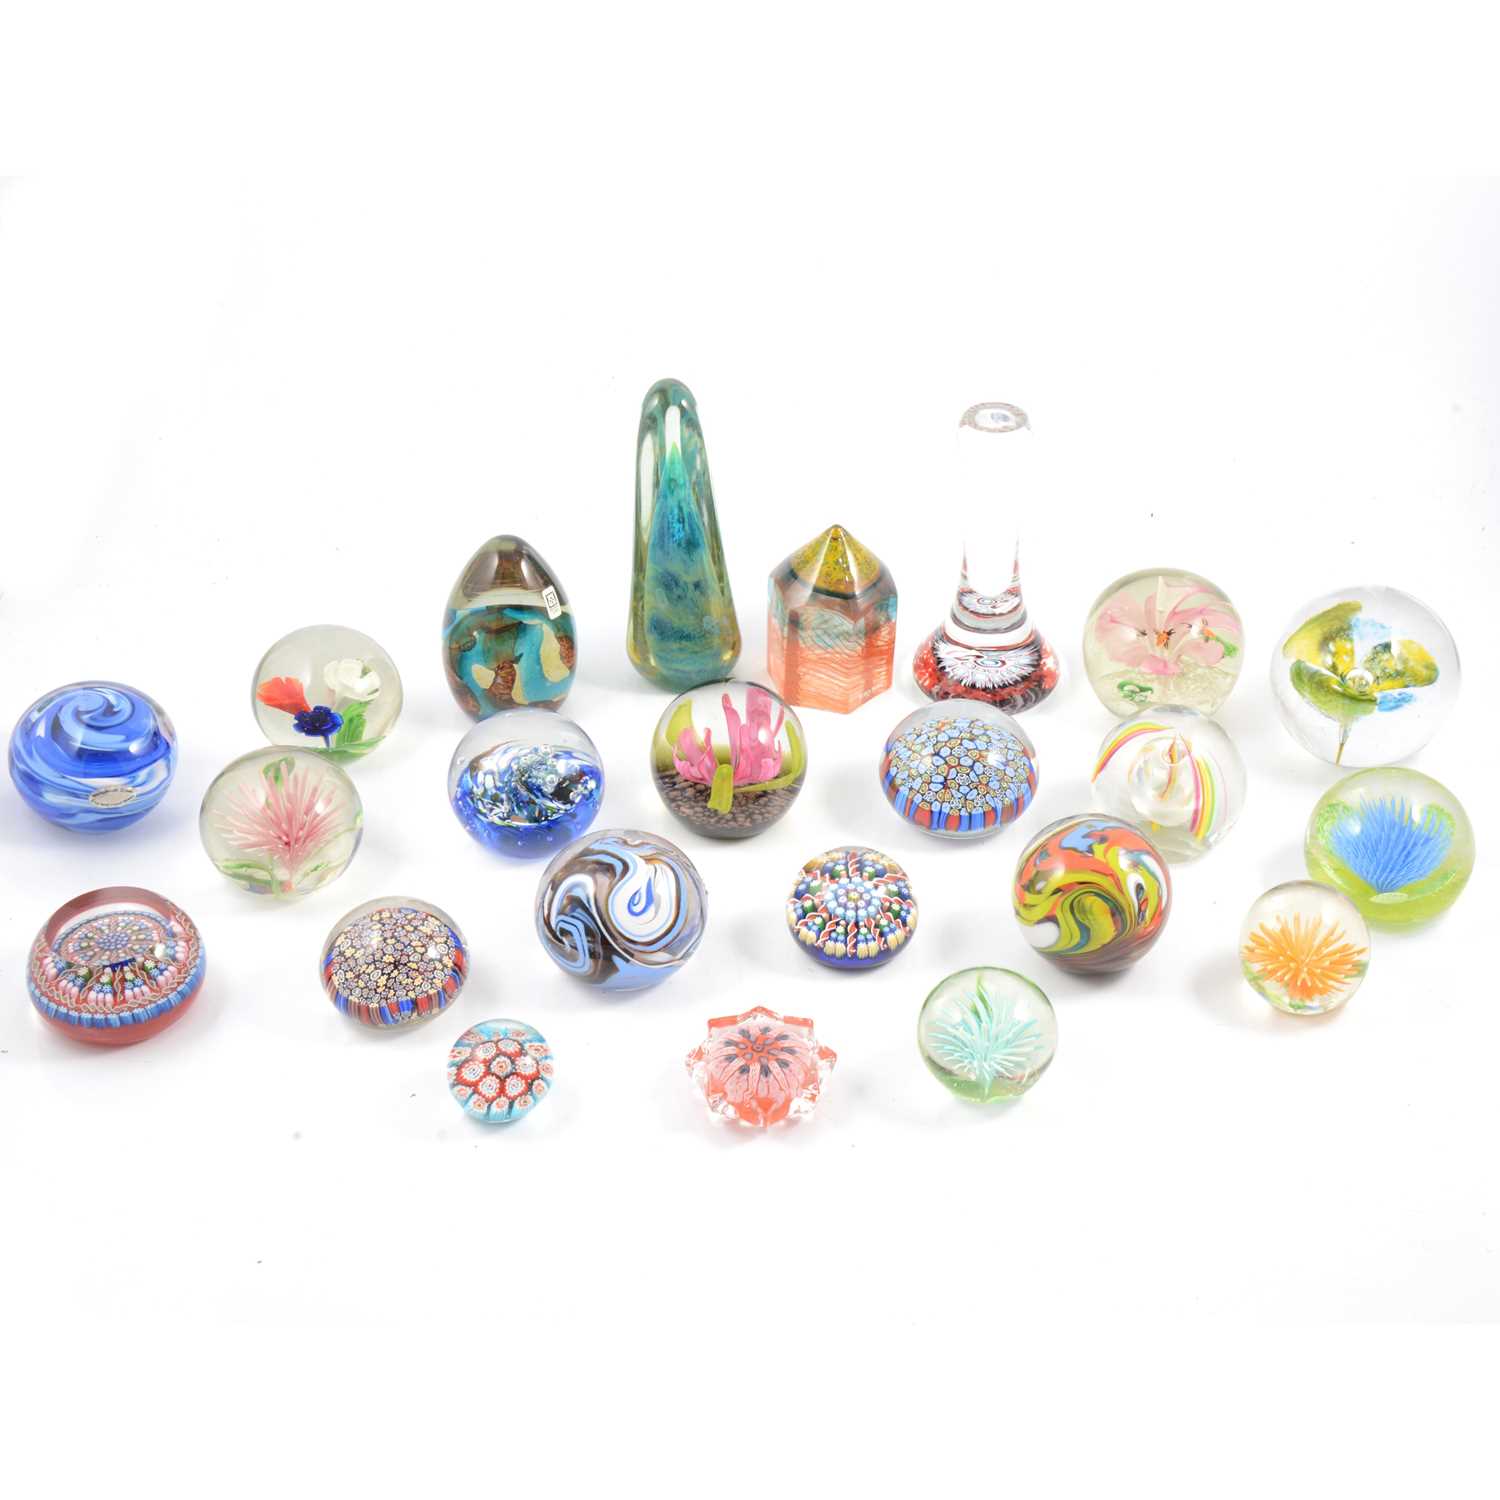 Lot 13 - Collection of glass twenty-three glass paperweights